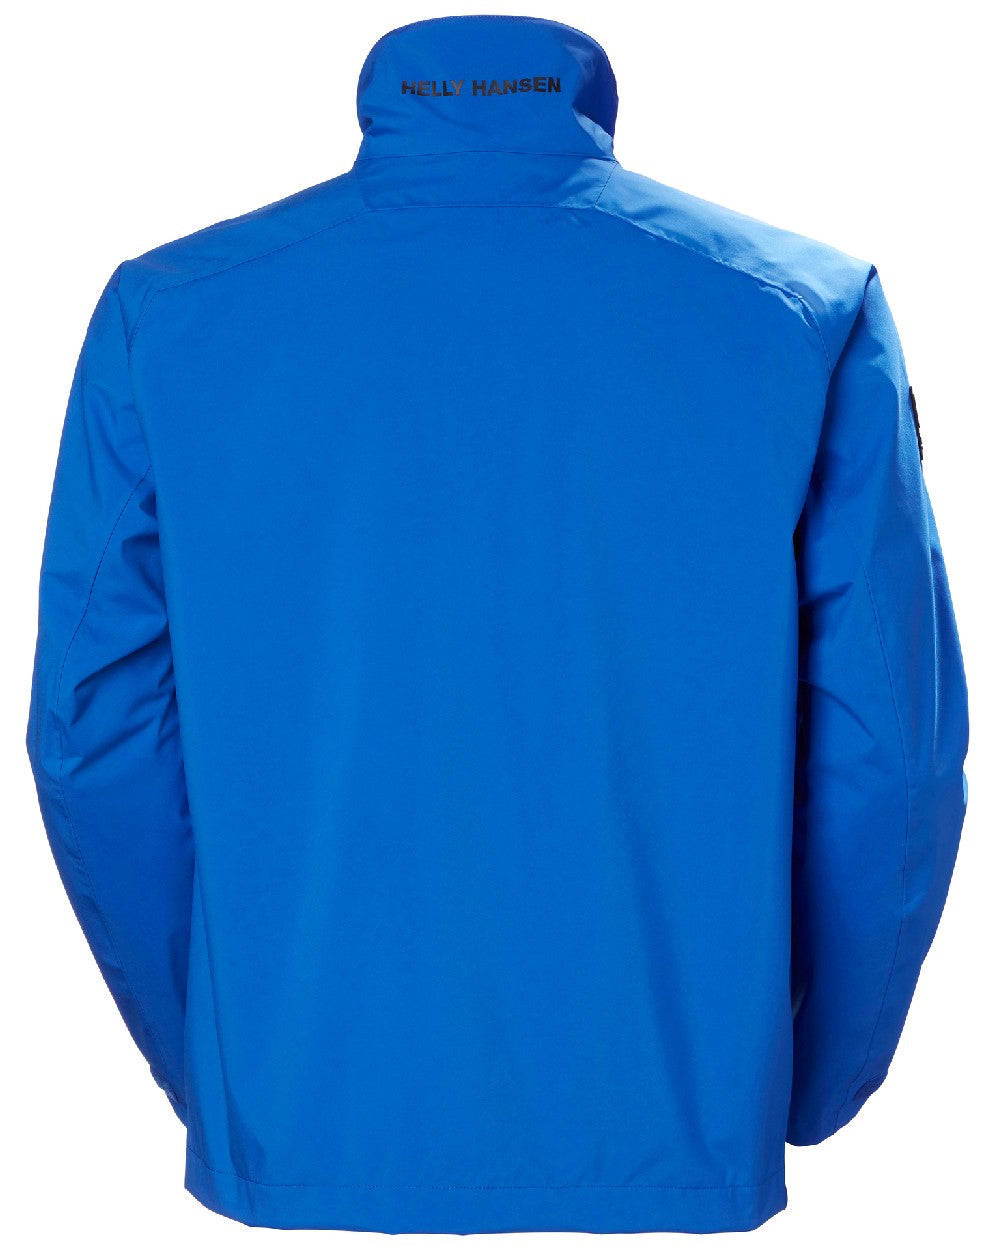 Cobalt 2.0 coloured Helly Hansen Mens HP Racing Sailing Jacket on white background 